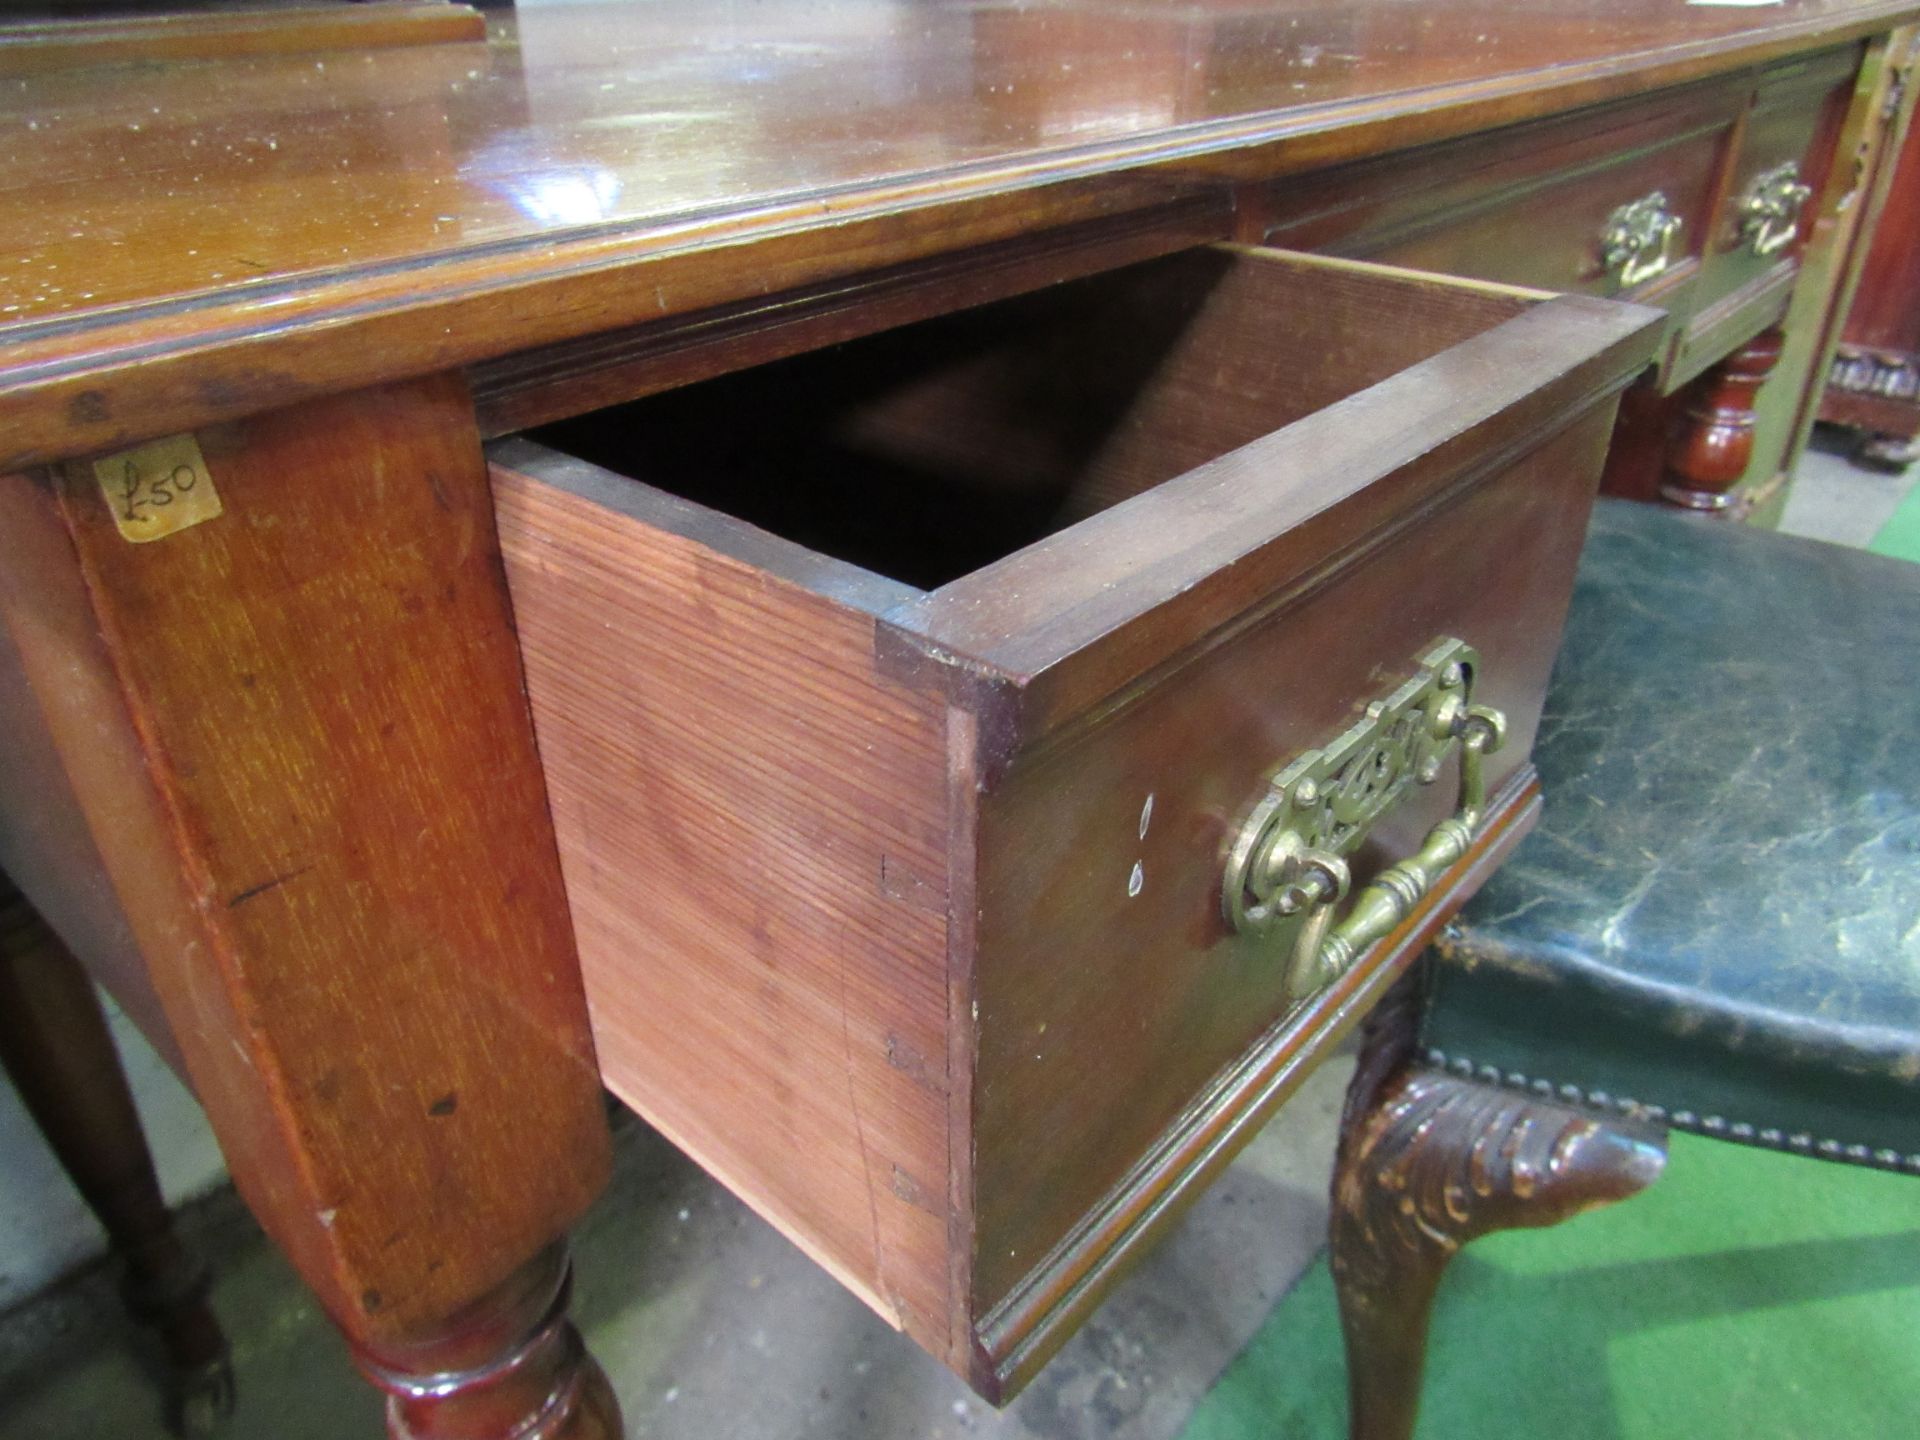 Mahogany dressing table with three frieze drawers, mirror flanked by two small cabinets, turned legs - Image 3 of 4